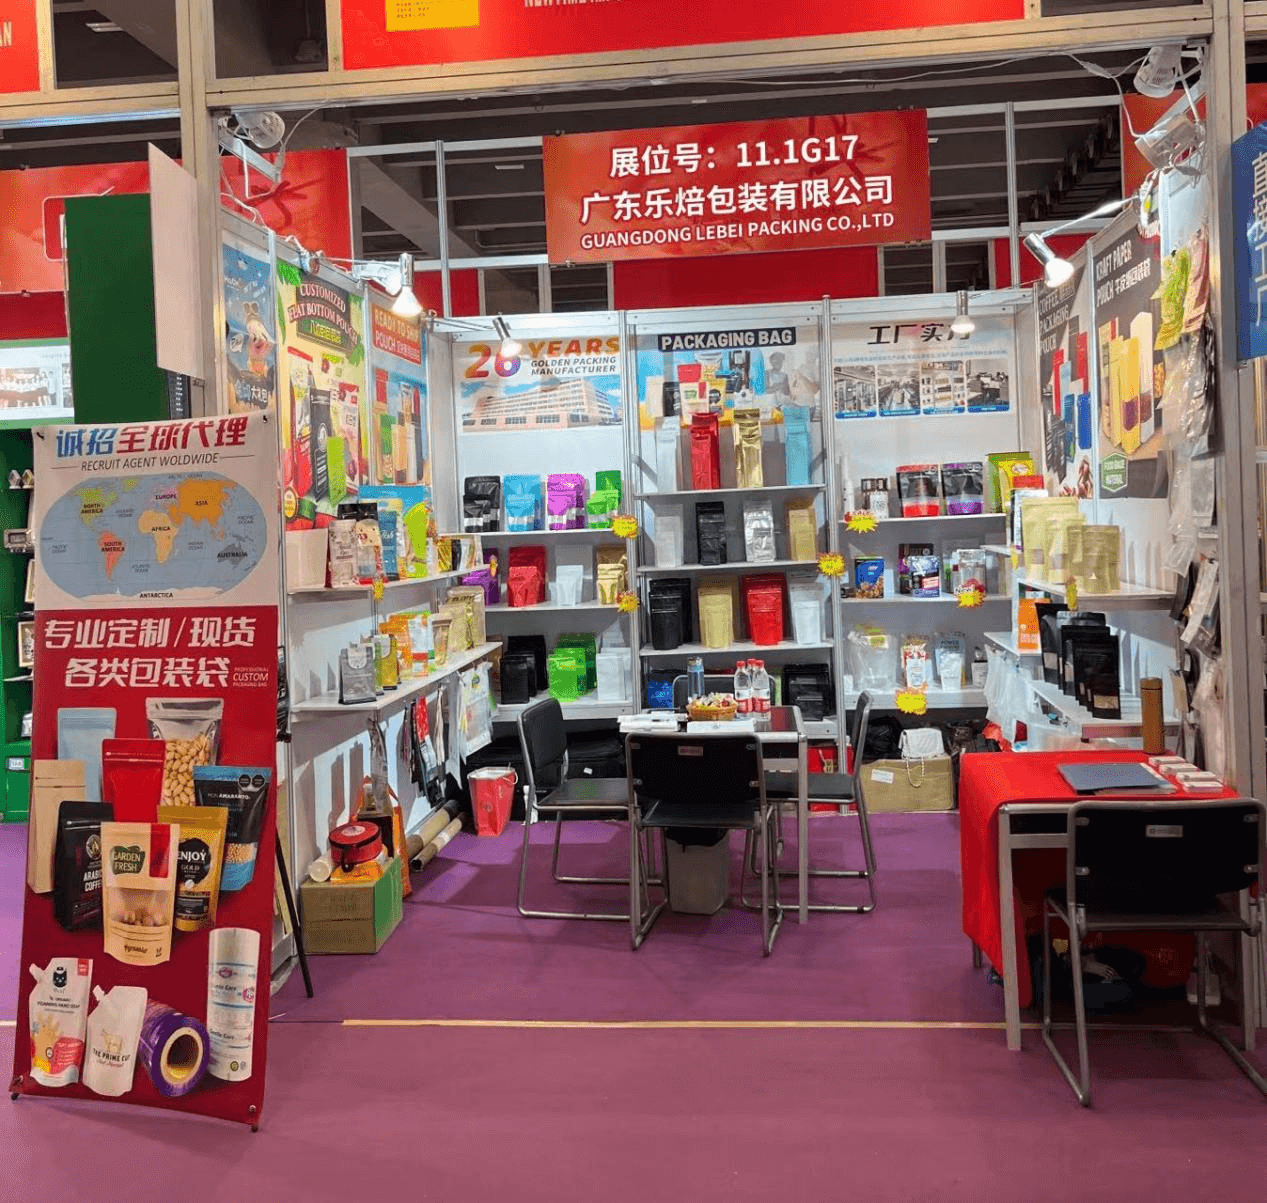 Guangdong Lebei Packing Co., Ltd deltog i 133. Canton Fair!